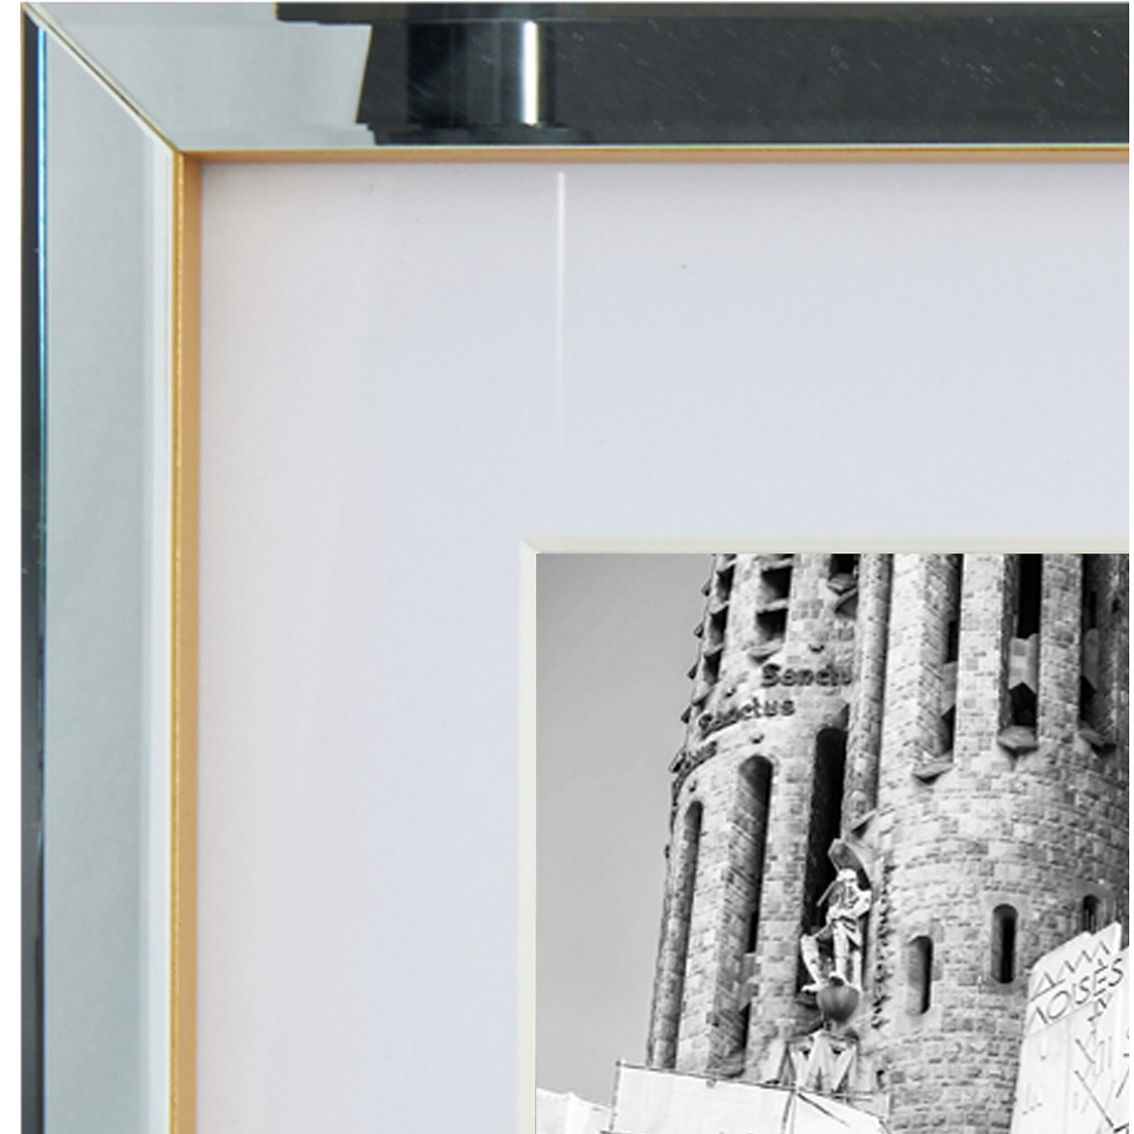 Mikasa Home 11 x 27 in. 5 Opening Mirror Gallery Collage Frame with Gold Sides - Image 4 of 7